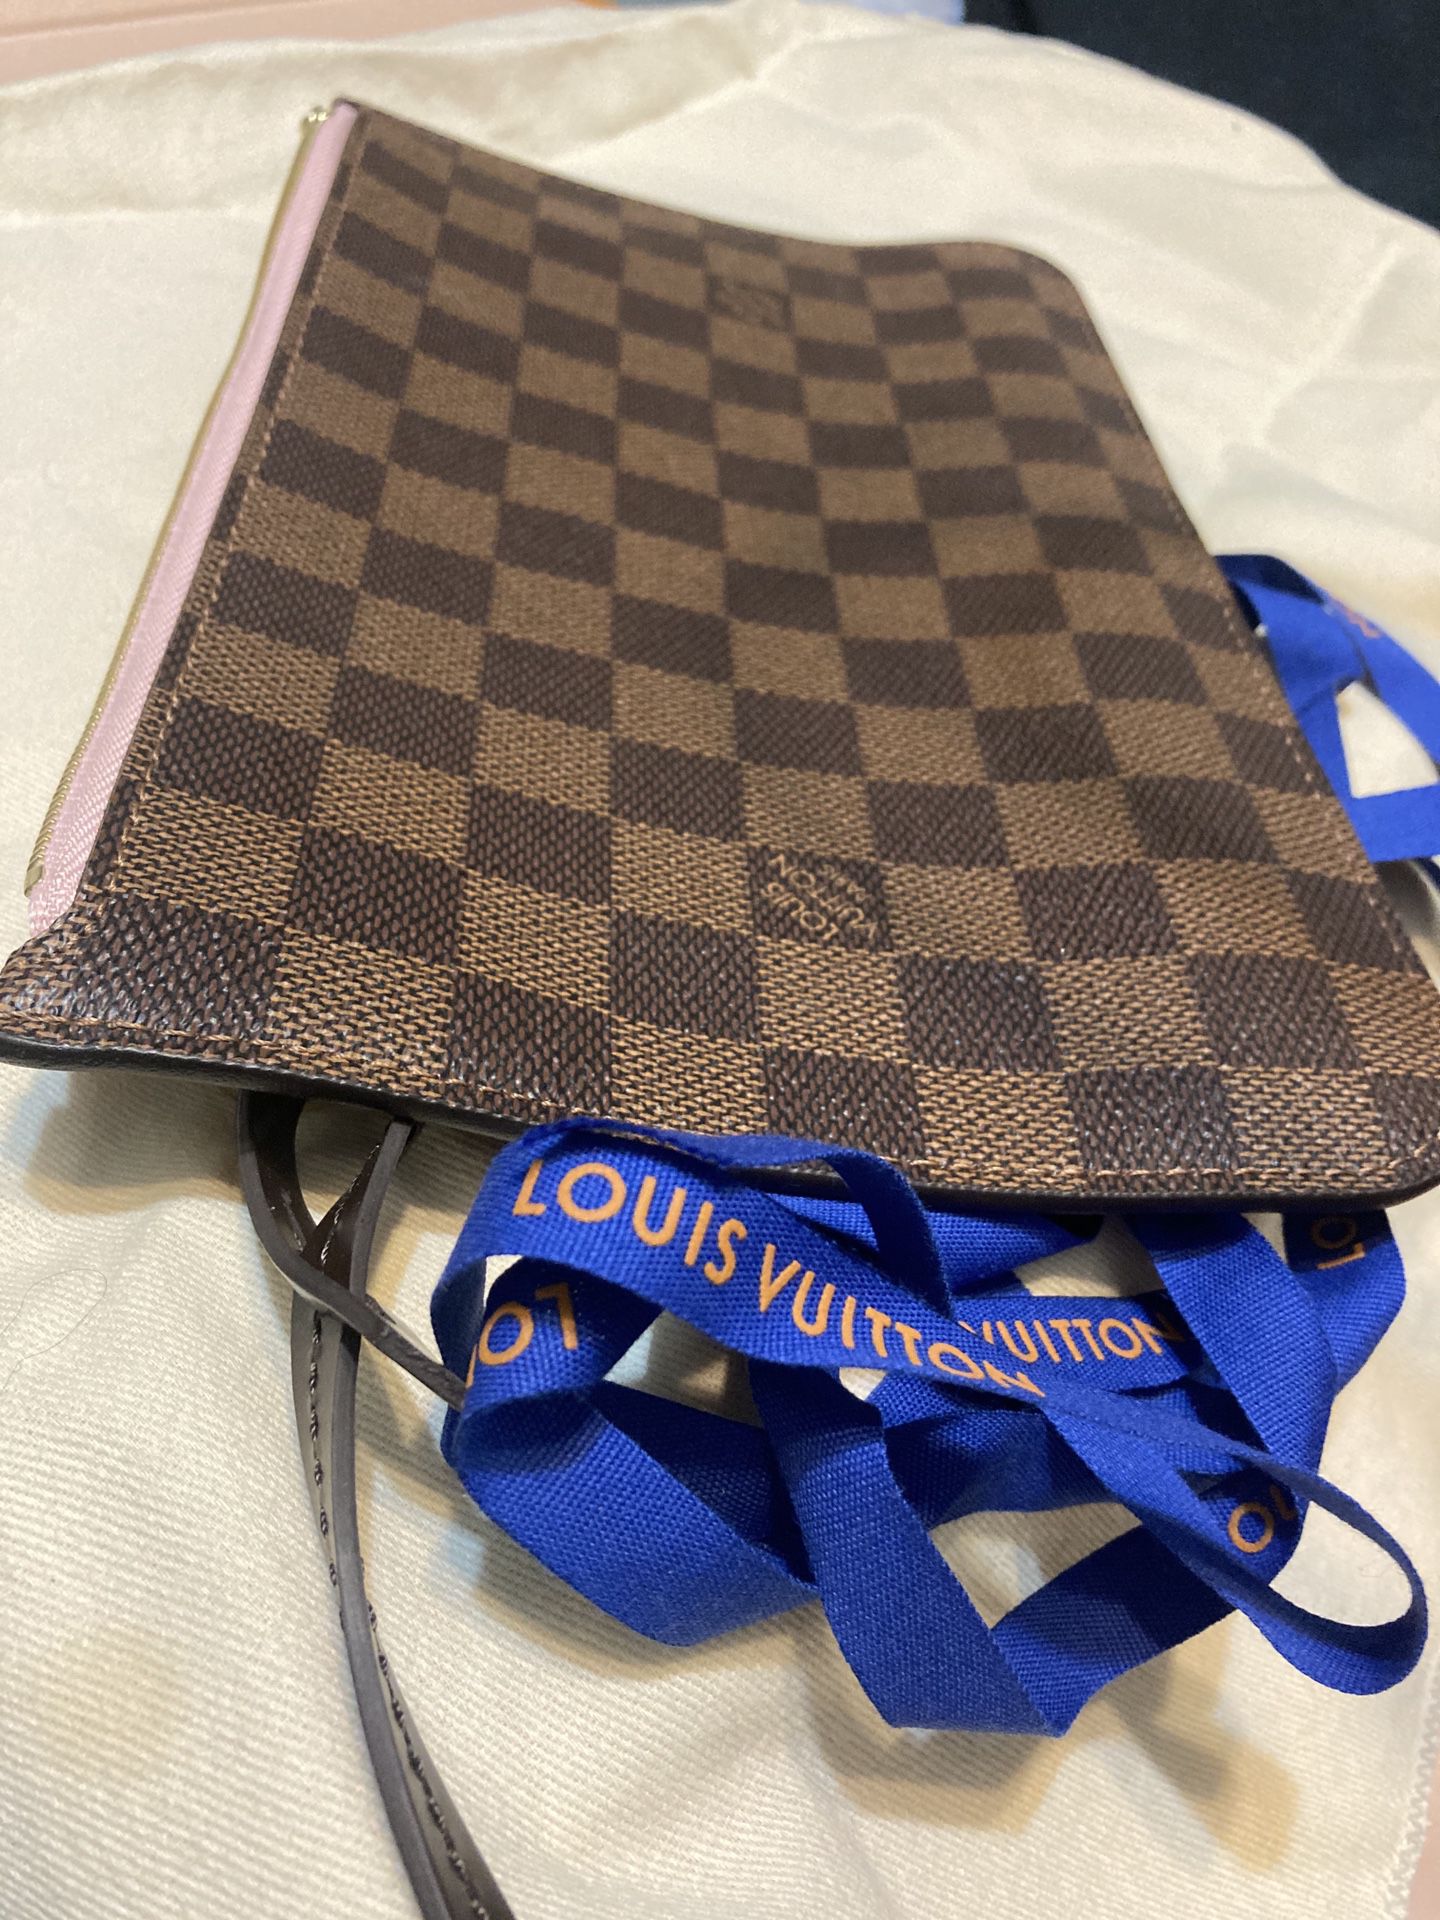 Louis Vuitton Pouchette Brand New With Receipt and proof of purchase